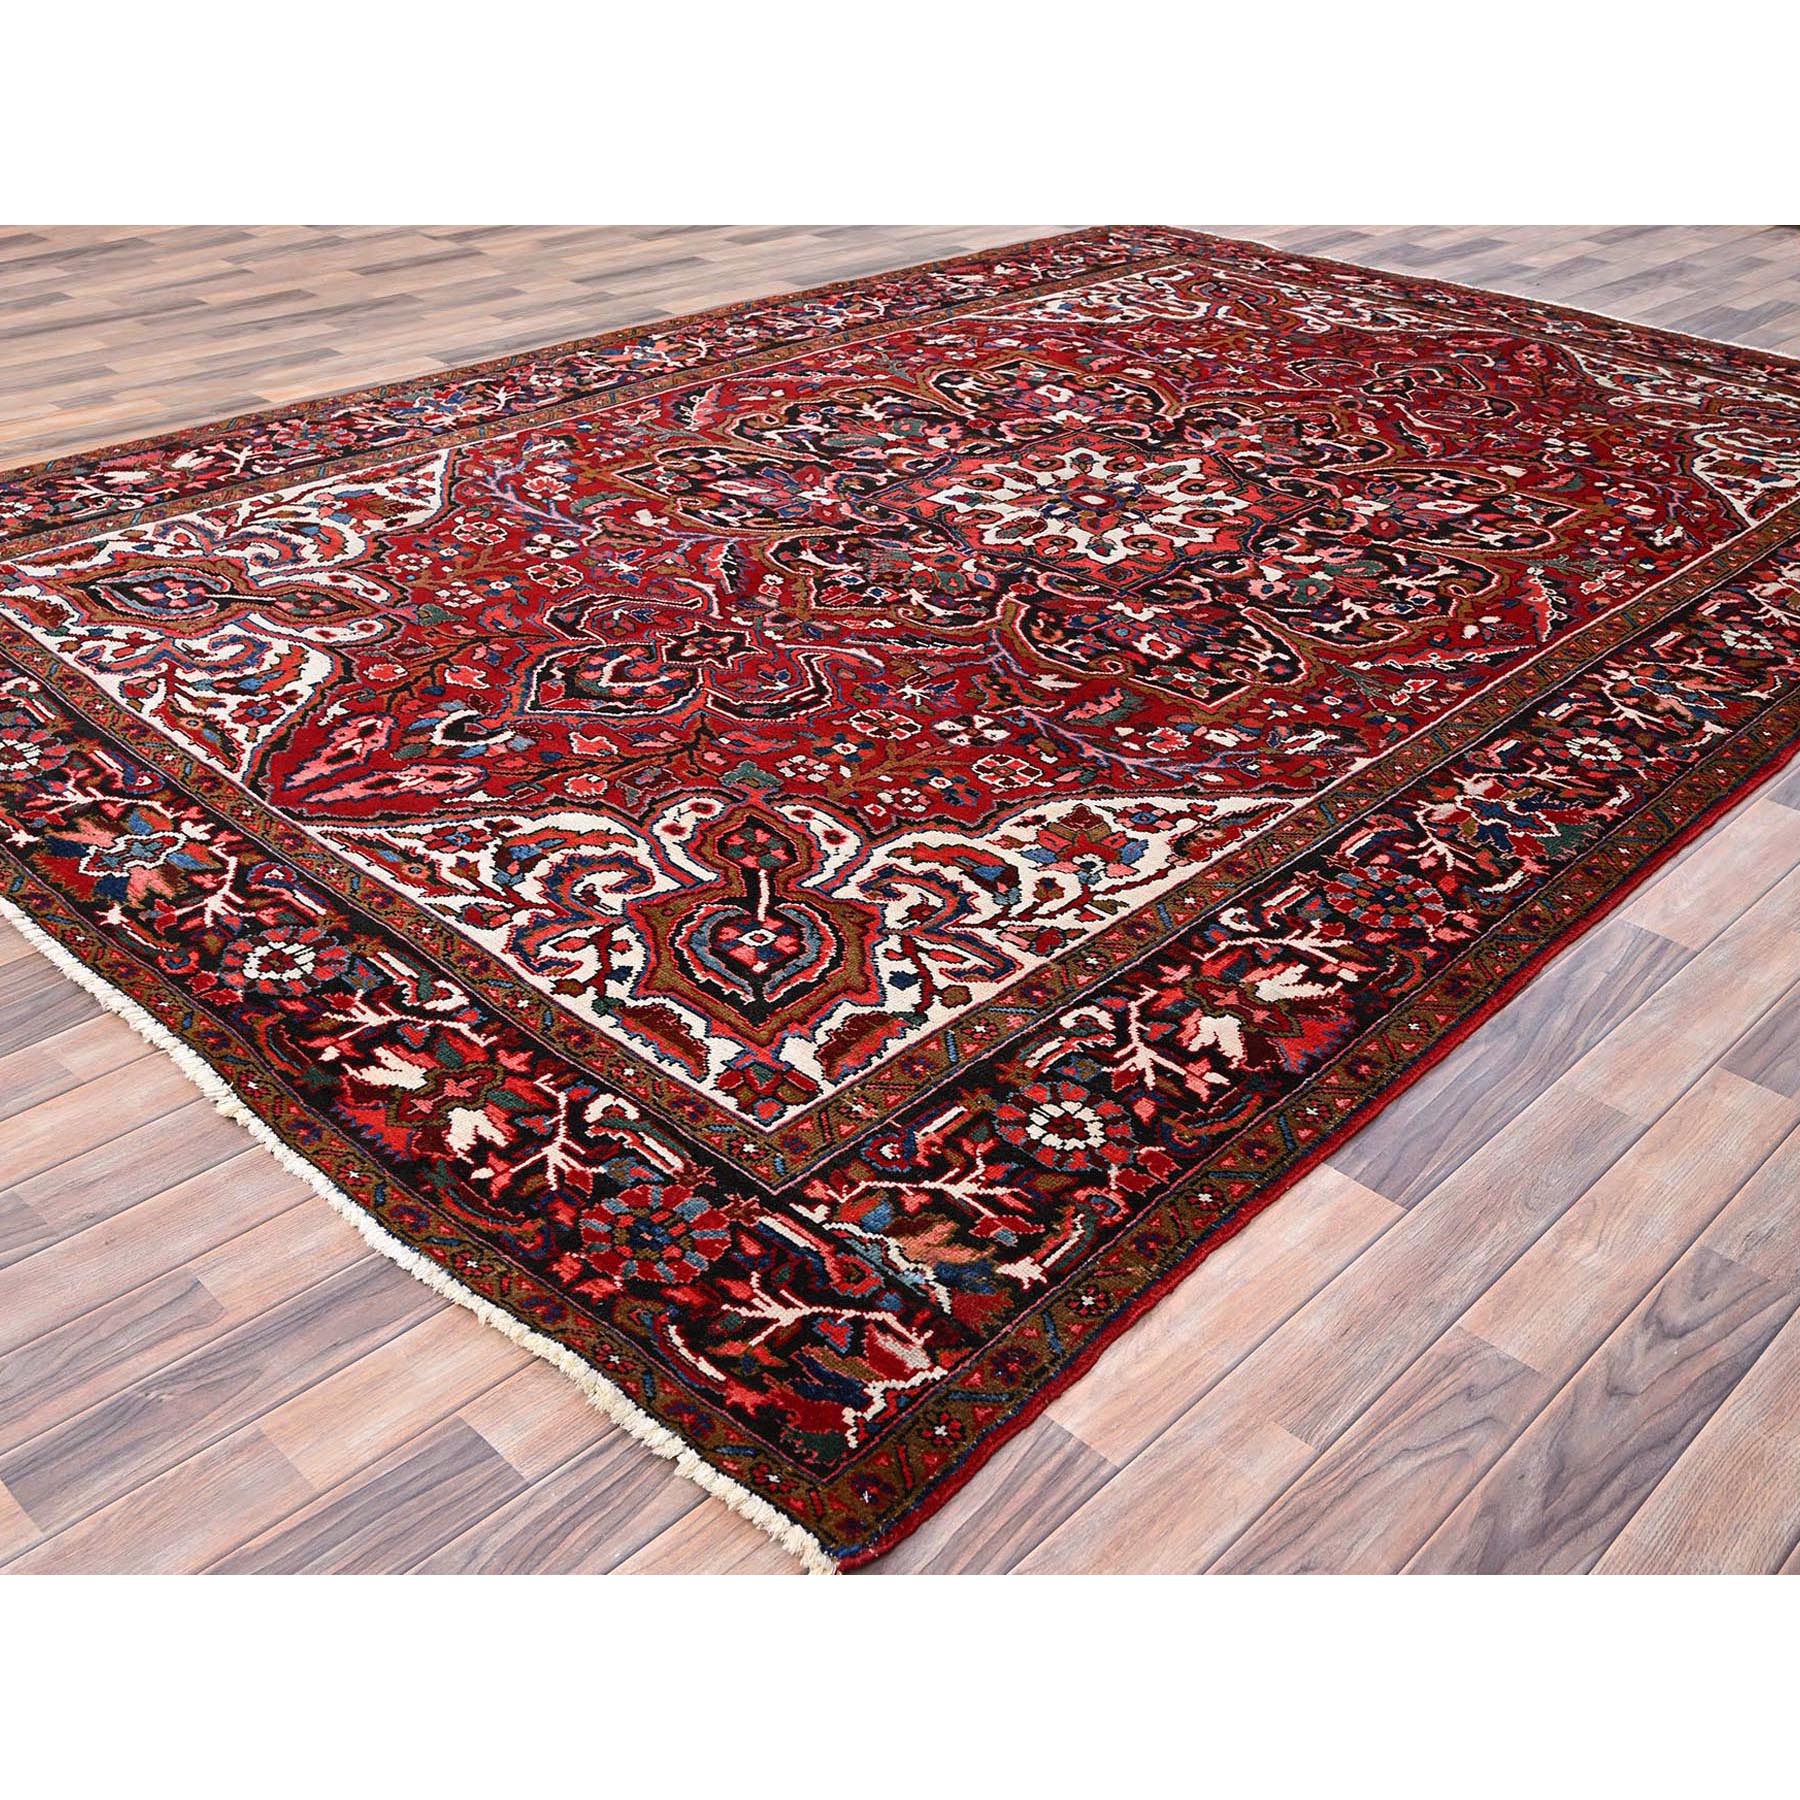 8'8"x12'1" Cardinals Red, Distressed Feel, Evenly Worn, Pure Wool, Hand Woven, Semi Antique Persian Heriz, Good Condition, Oriental Rug 